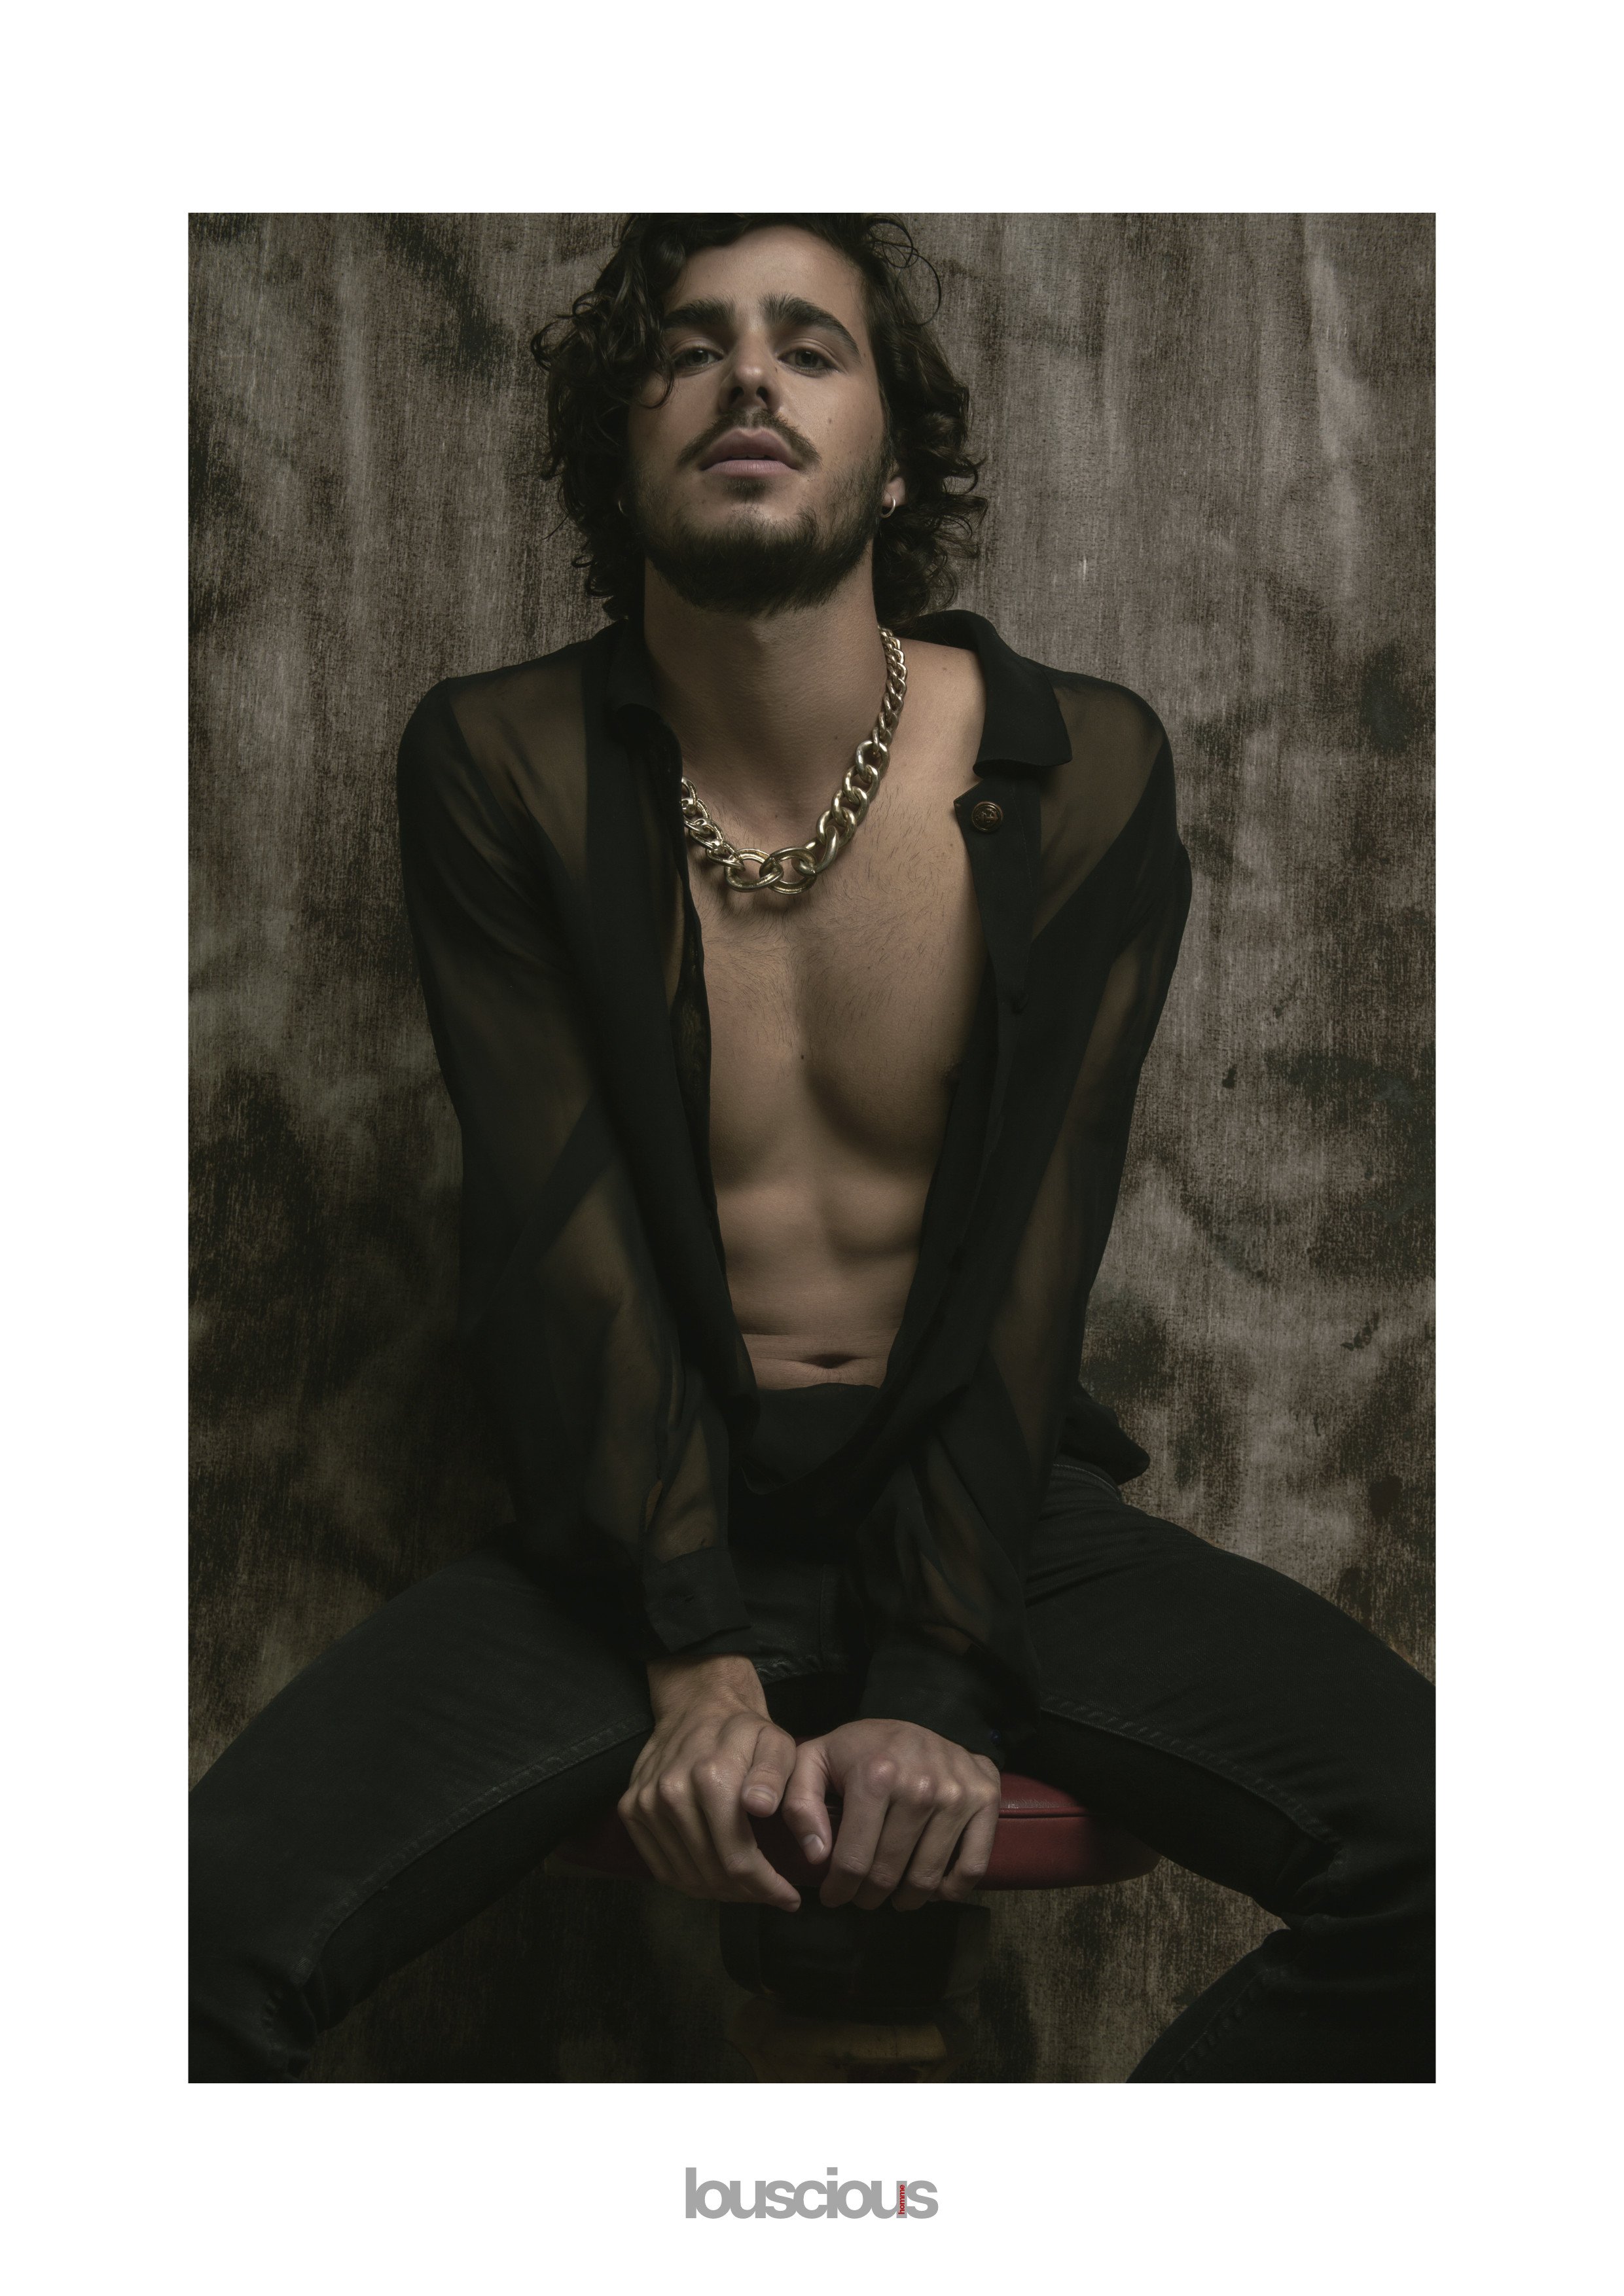 Louscious Homme Online Editorial - He´s the only one by Juan Carlos Canahuiri  _13.jpg